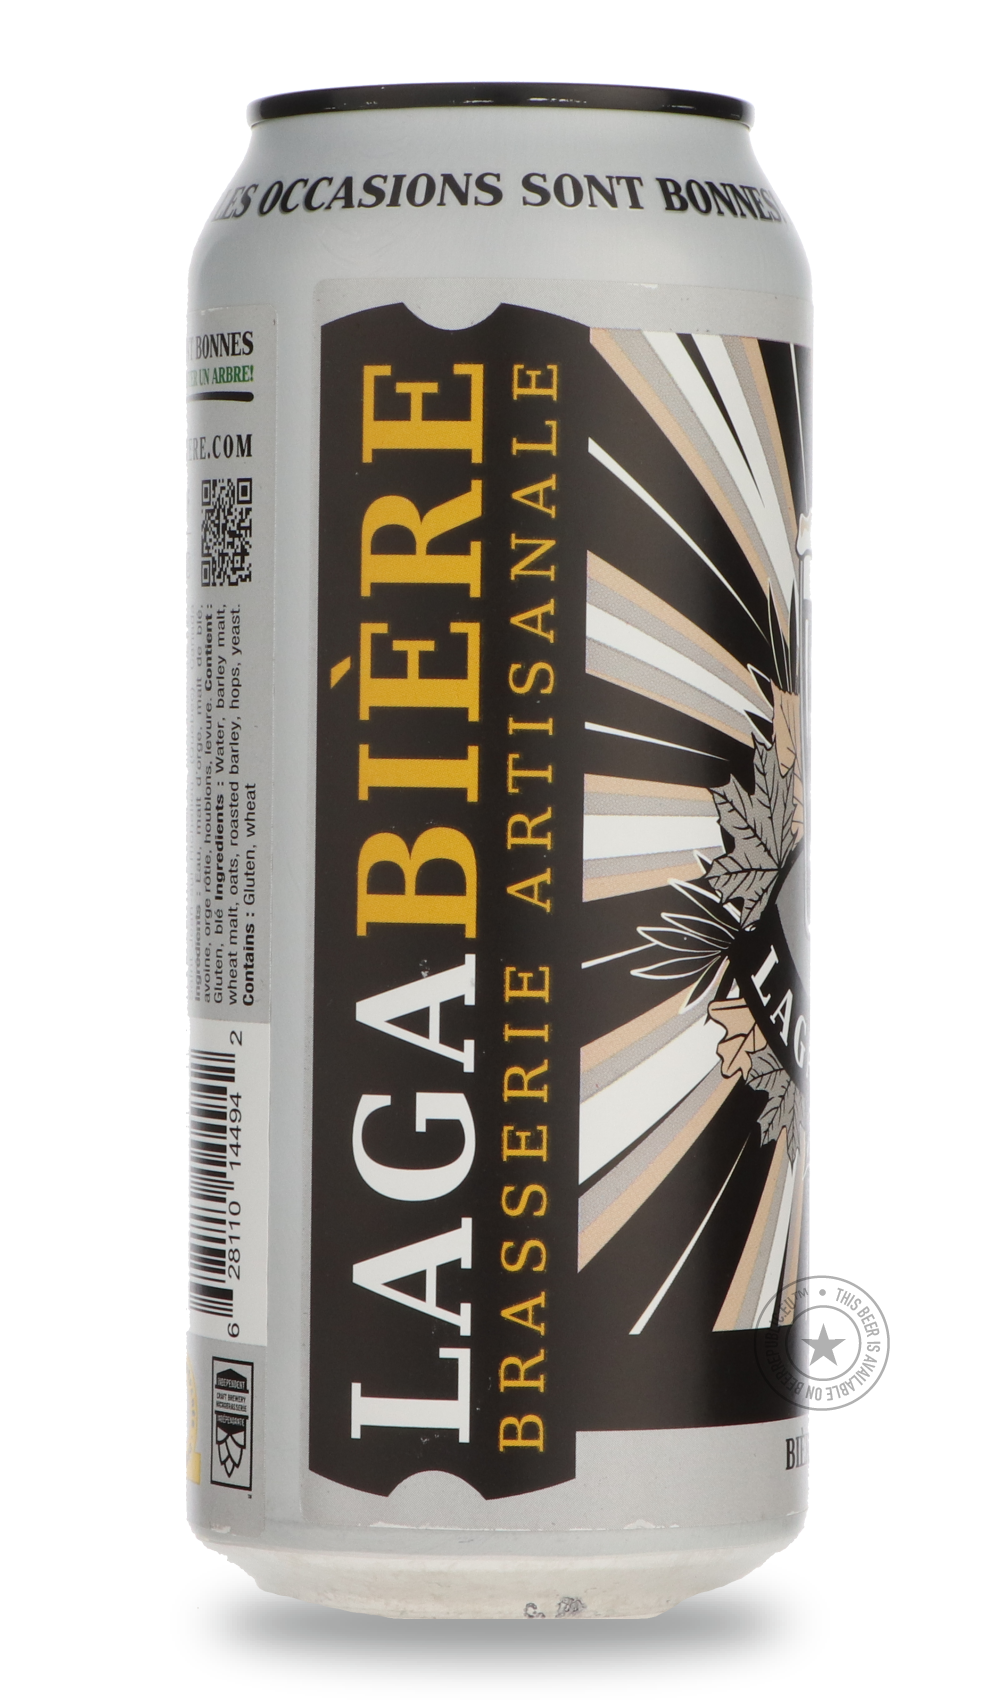 -Lagabière- LagaStout-Stout & Porter- Only @ Beer Republic - The best online beer store for American & Canadian craft beer - Buy beer online from the USA and Canada - Bier online kopen - Amerikaans bier kopen - Craft beer store - Craft beer kopen - Amerikanisch bier kaufen - Bier online kaufen - Acheter biere online - IPA - Stout - Porter - New England IPA - Hazy IPA - Imperial Stout - Barrel Aged - Barrel Aged Imperial Stout - Brown - Dark beer - Blond - Blonde - Pilsner - Lager - Wheat - Weizen - Amber - 